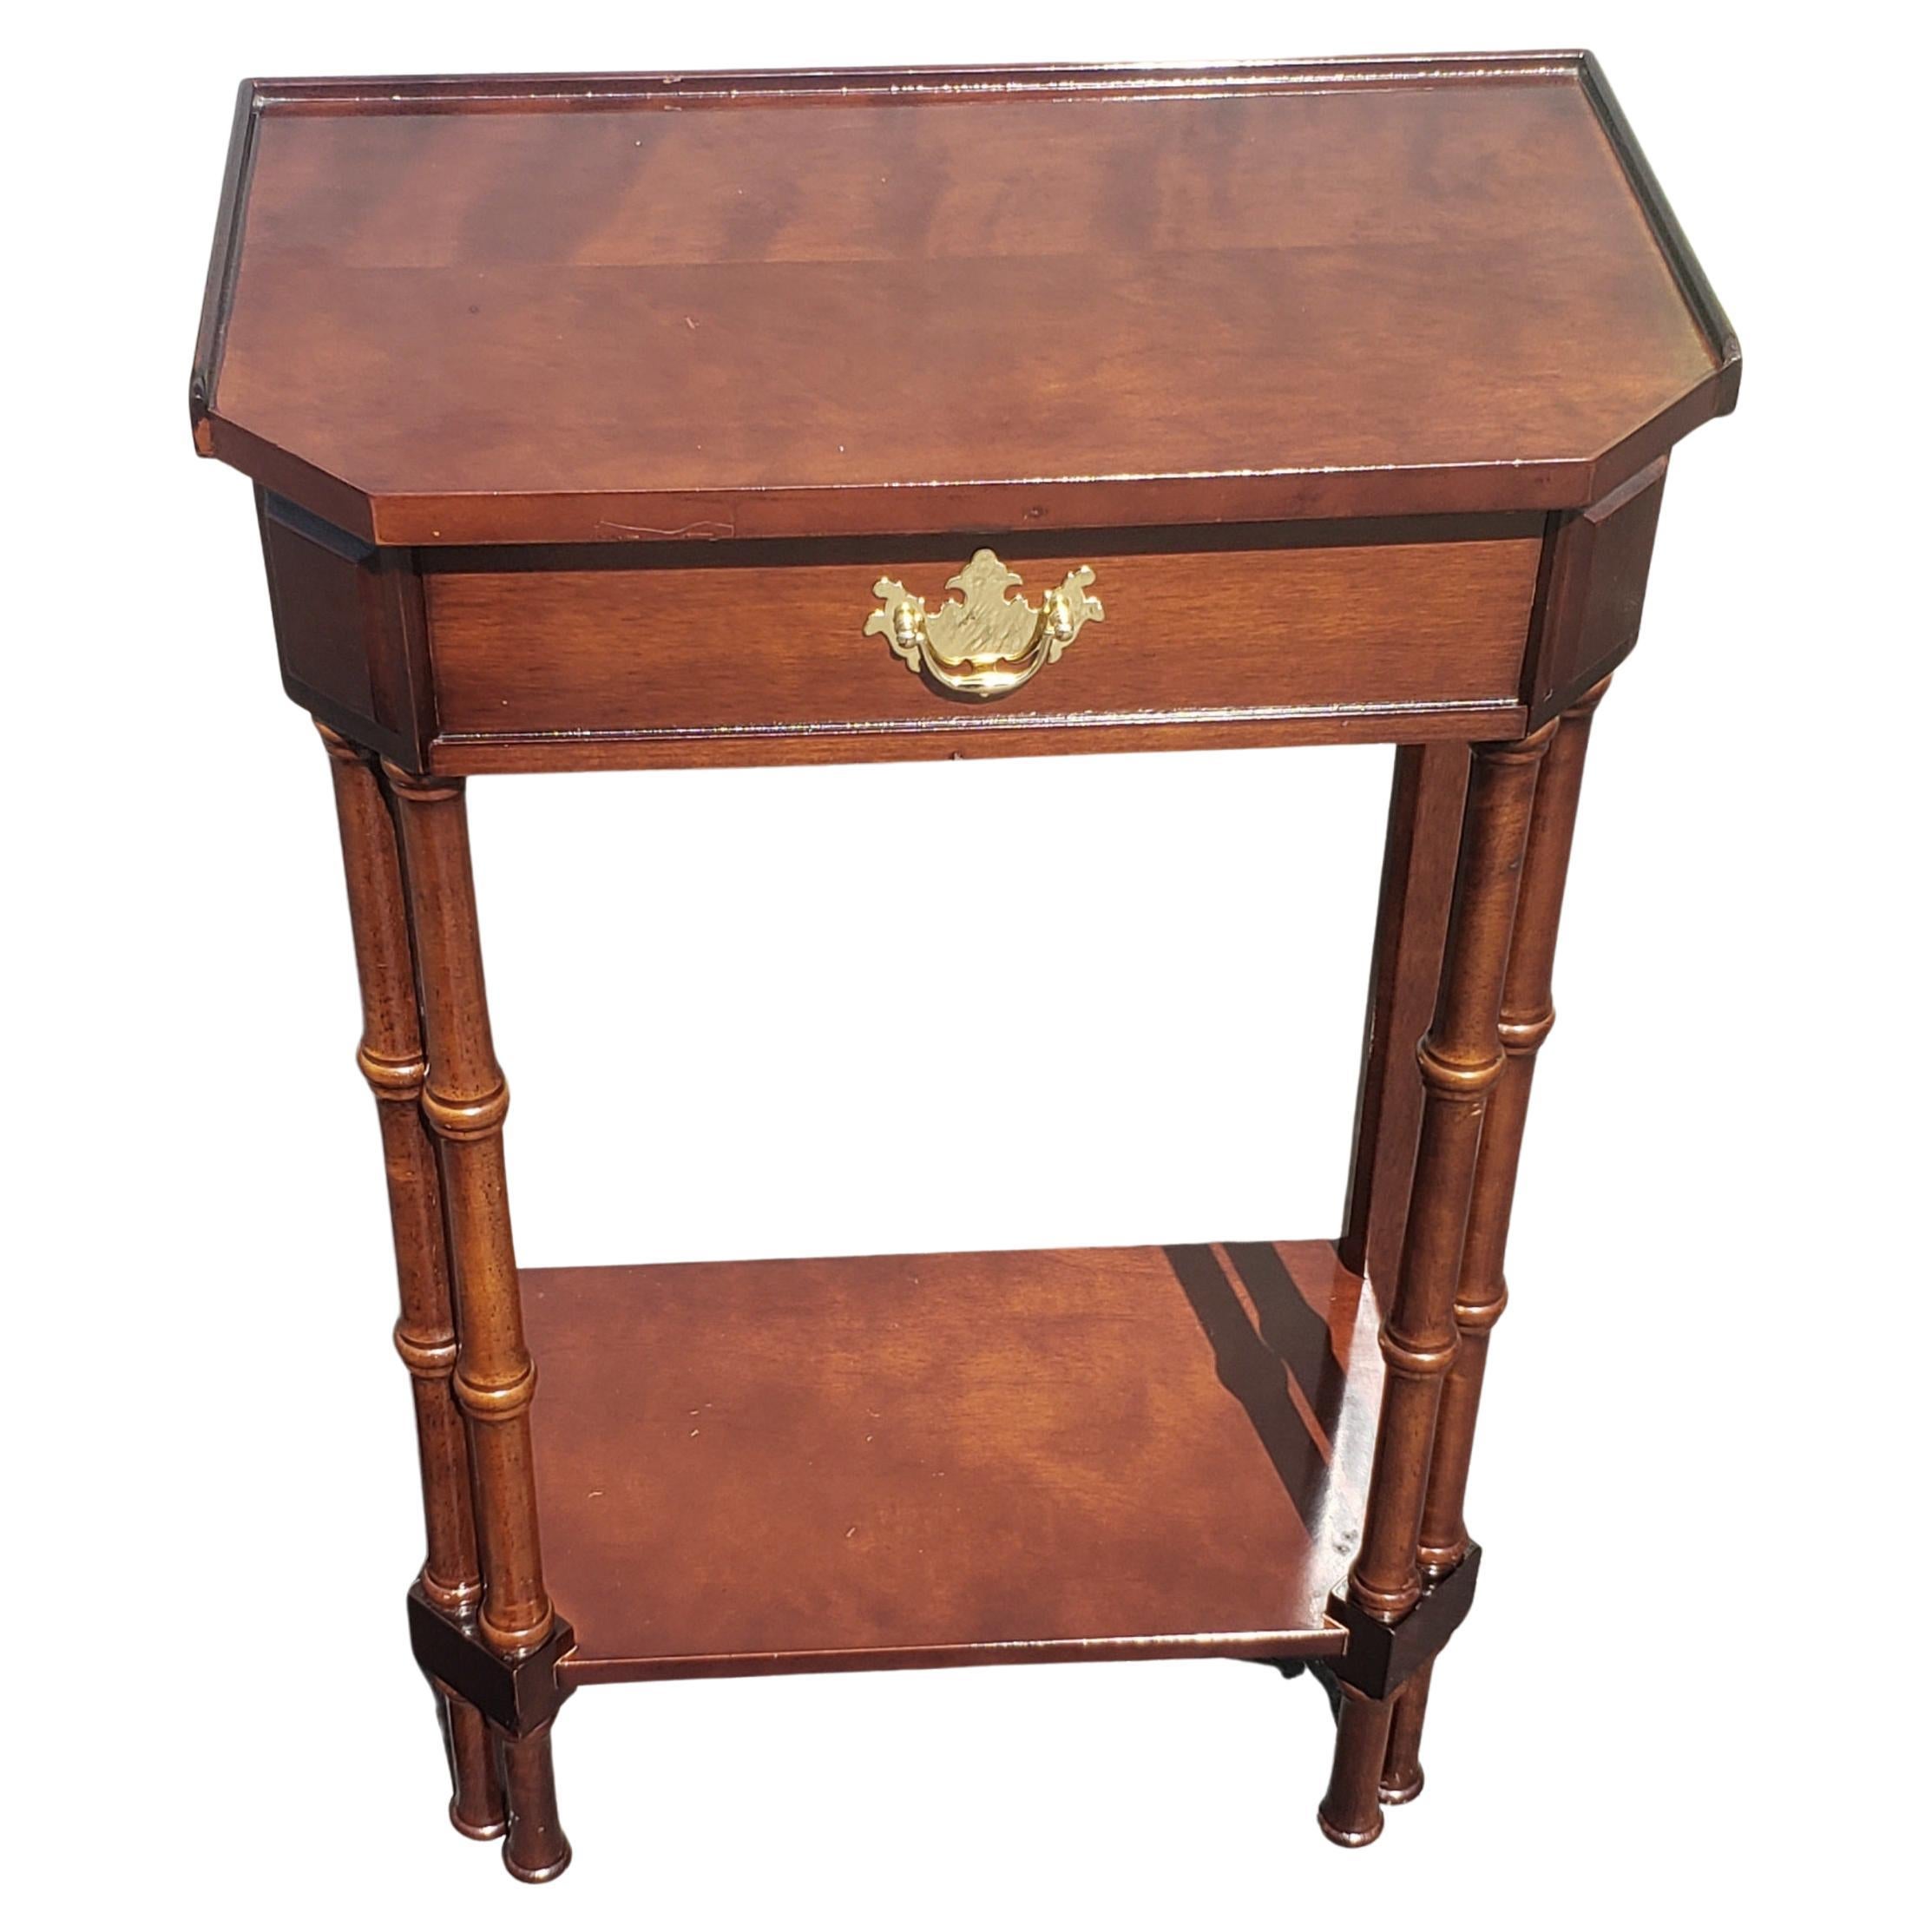 Late 20th Century Mahogany Faux Bamboo Single Drawer Side Table